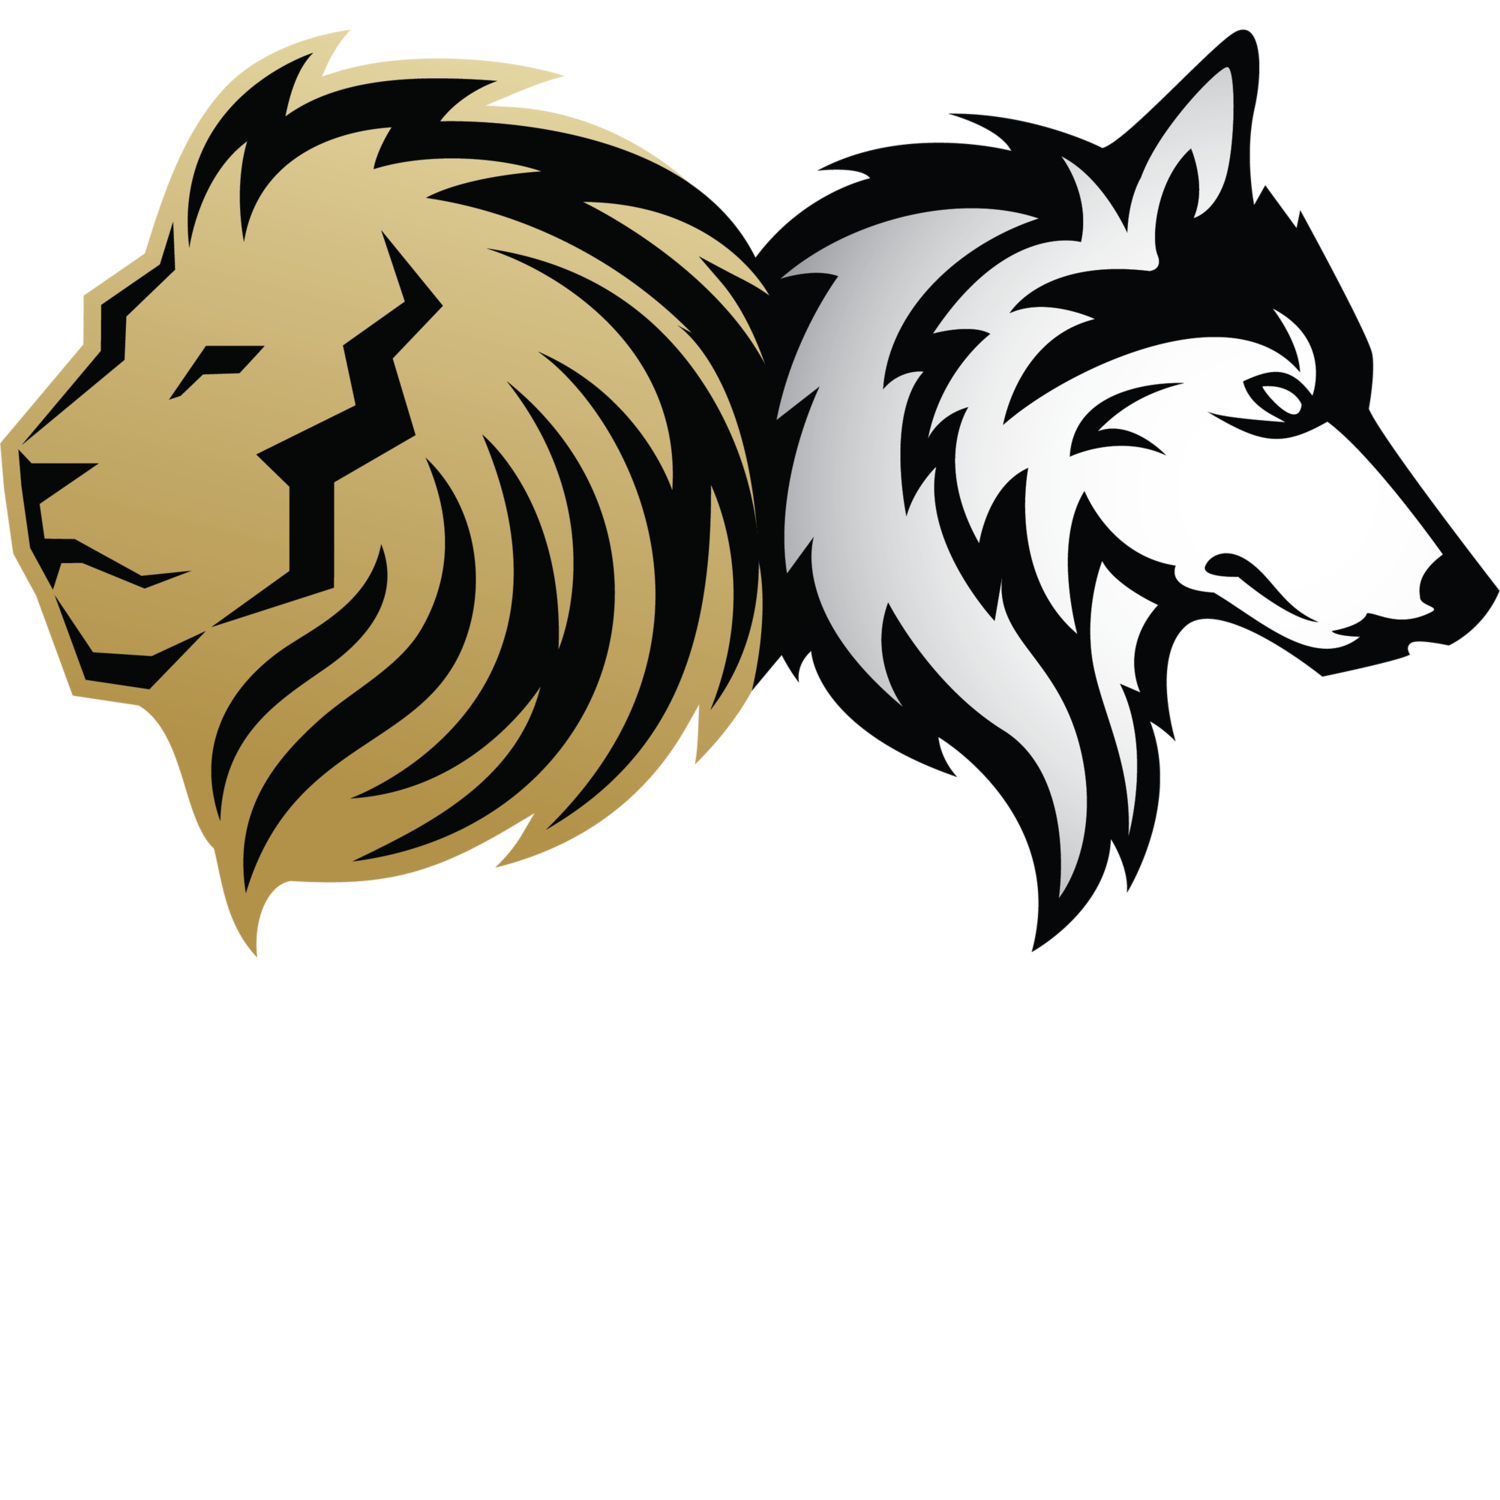 Lion Wolf Productions